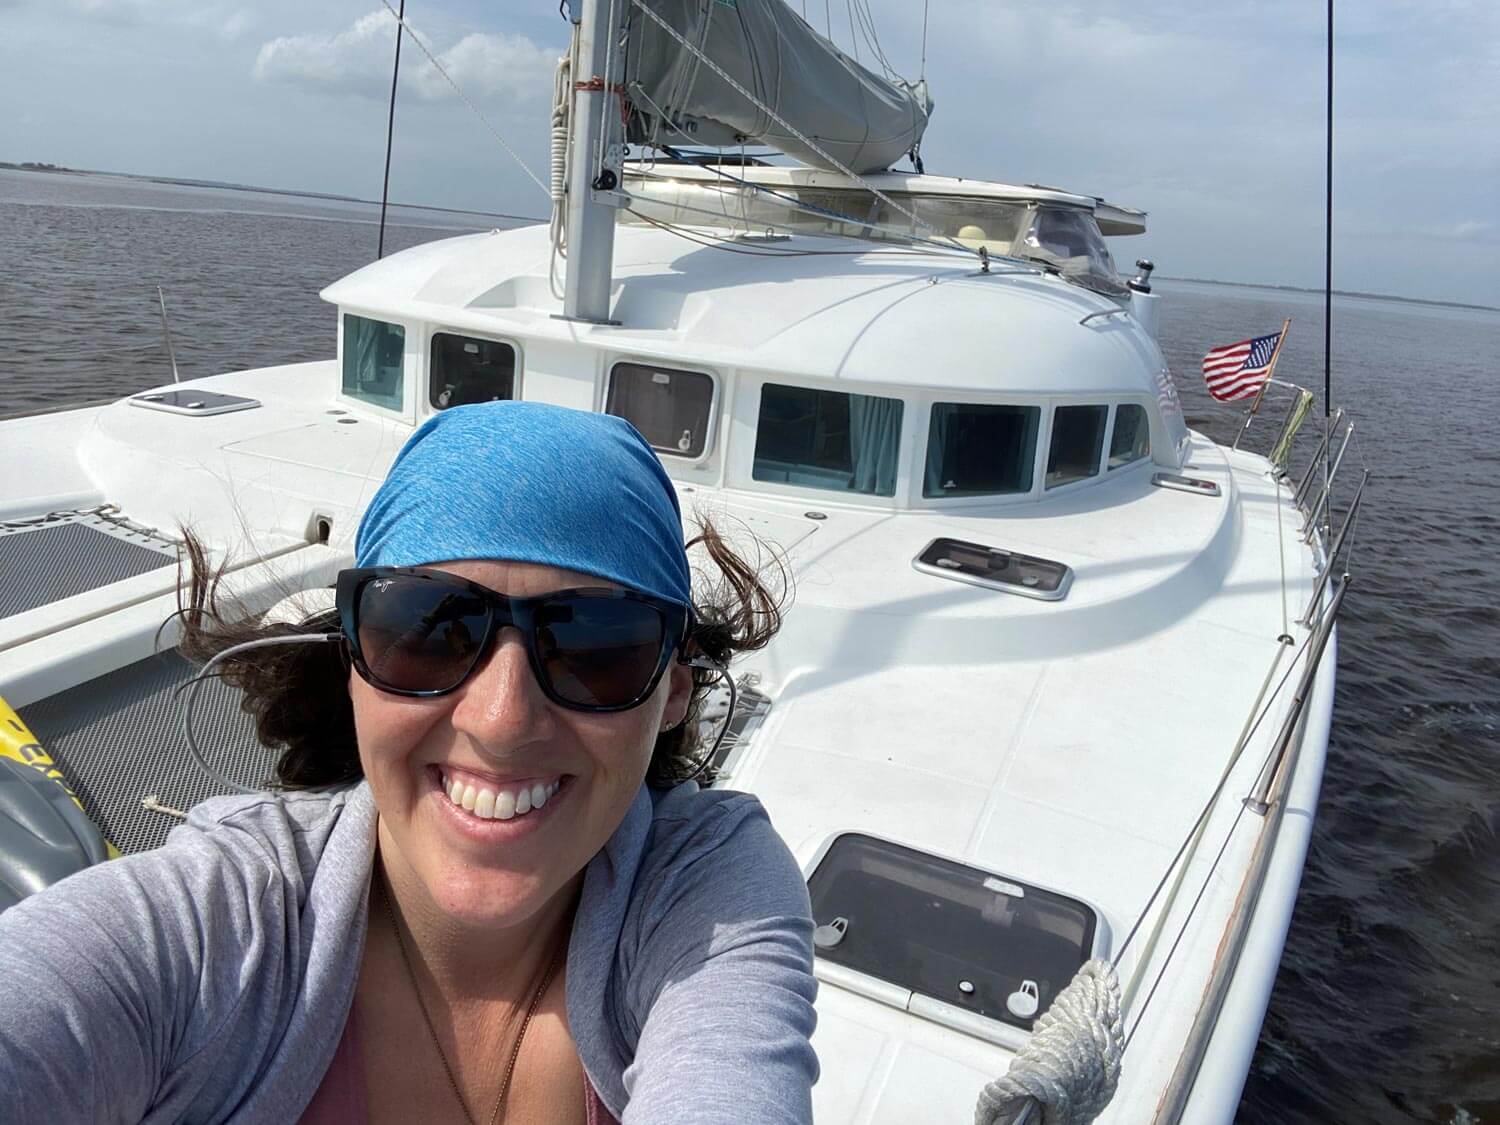 Woman on the bow of catamaran taking a selfie with bandana and sunglasses on.